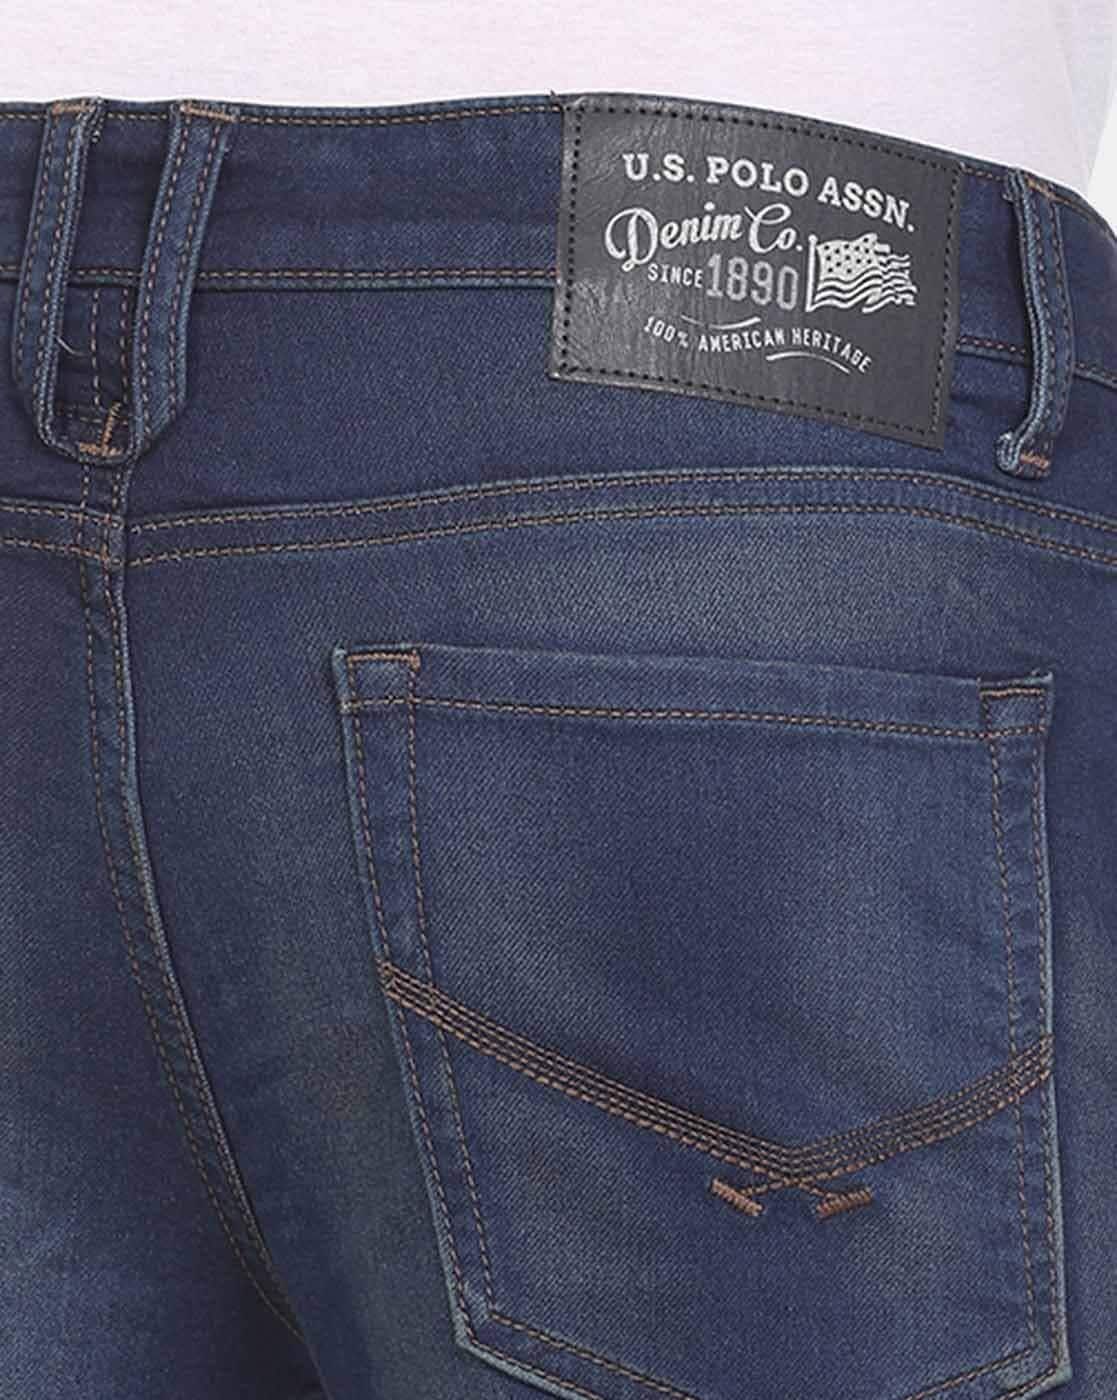 Top 151+ american polo jeans latest